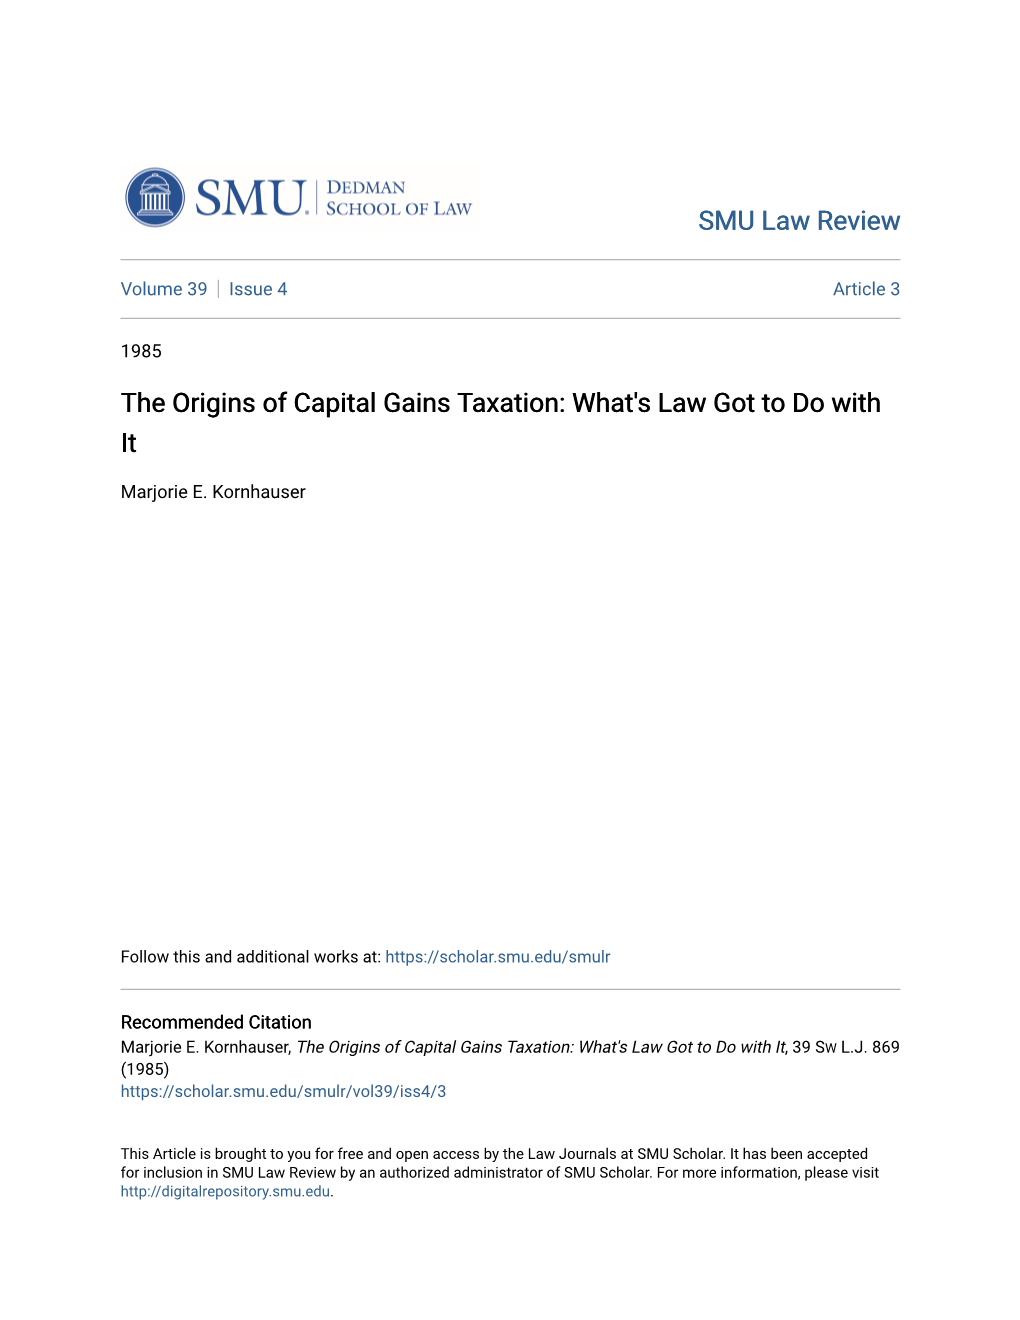 The Origins of Capital Gains Taxation: What's Law Got to Do with It